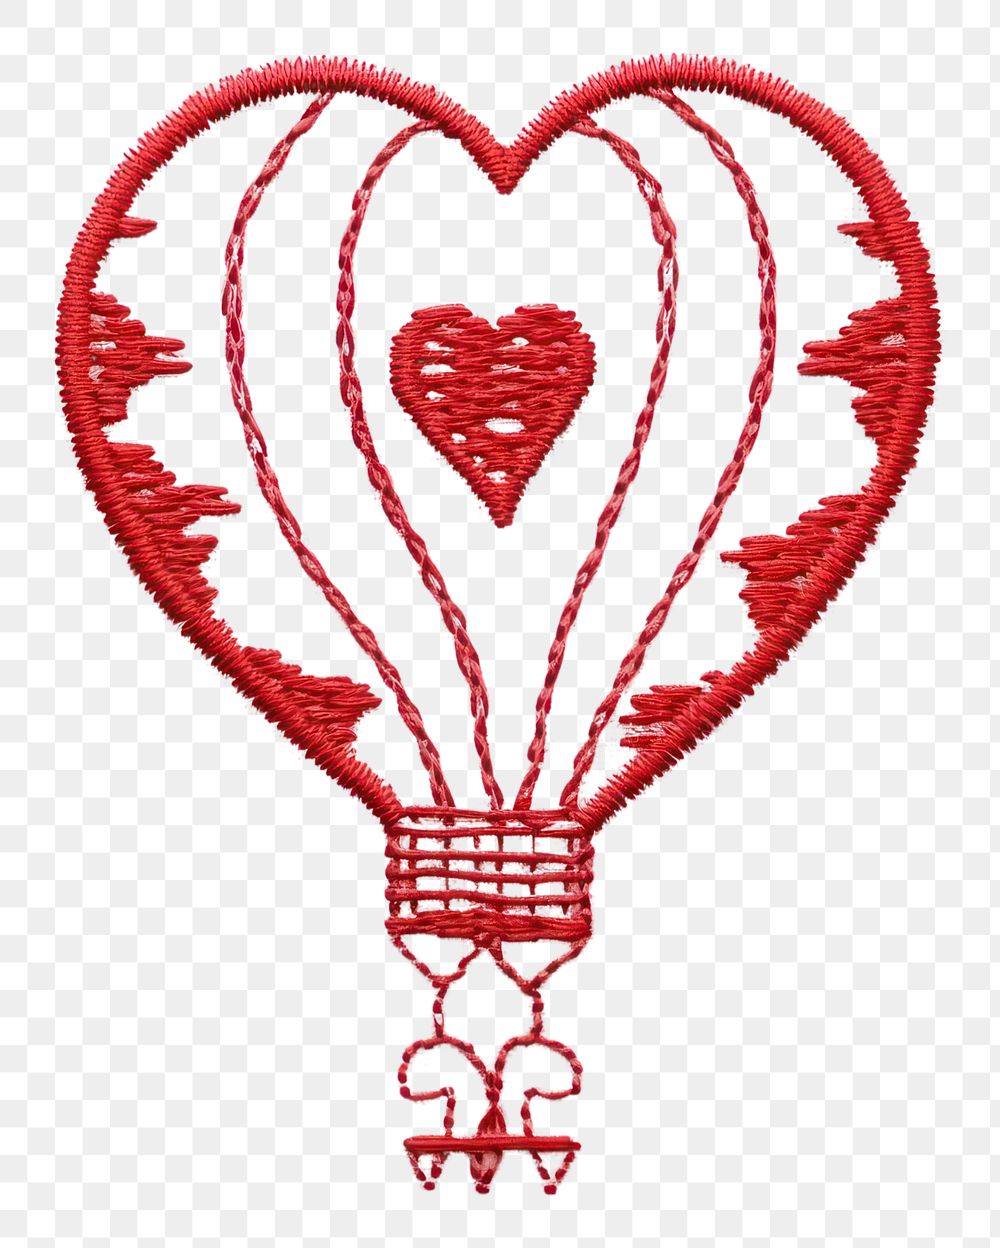 PNG The balloon in embroidery style needlework textile transportation.